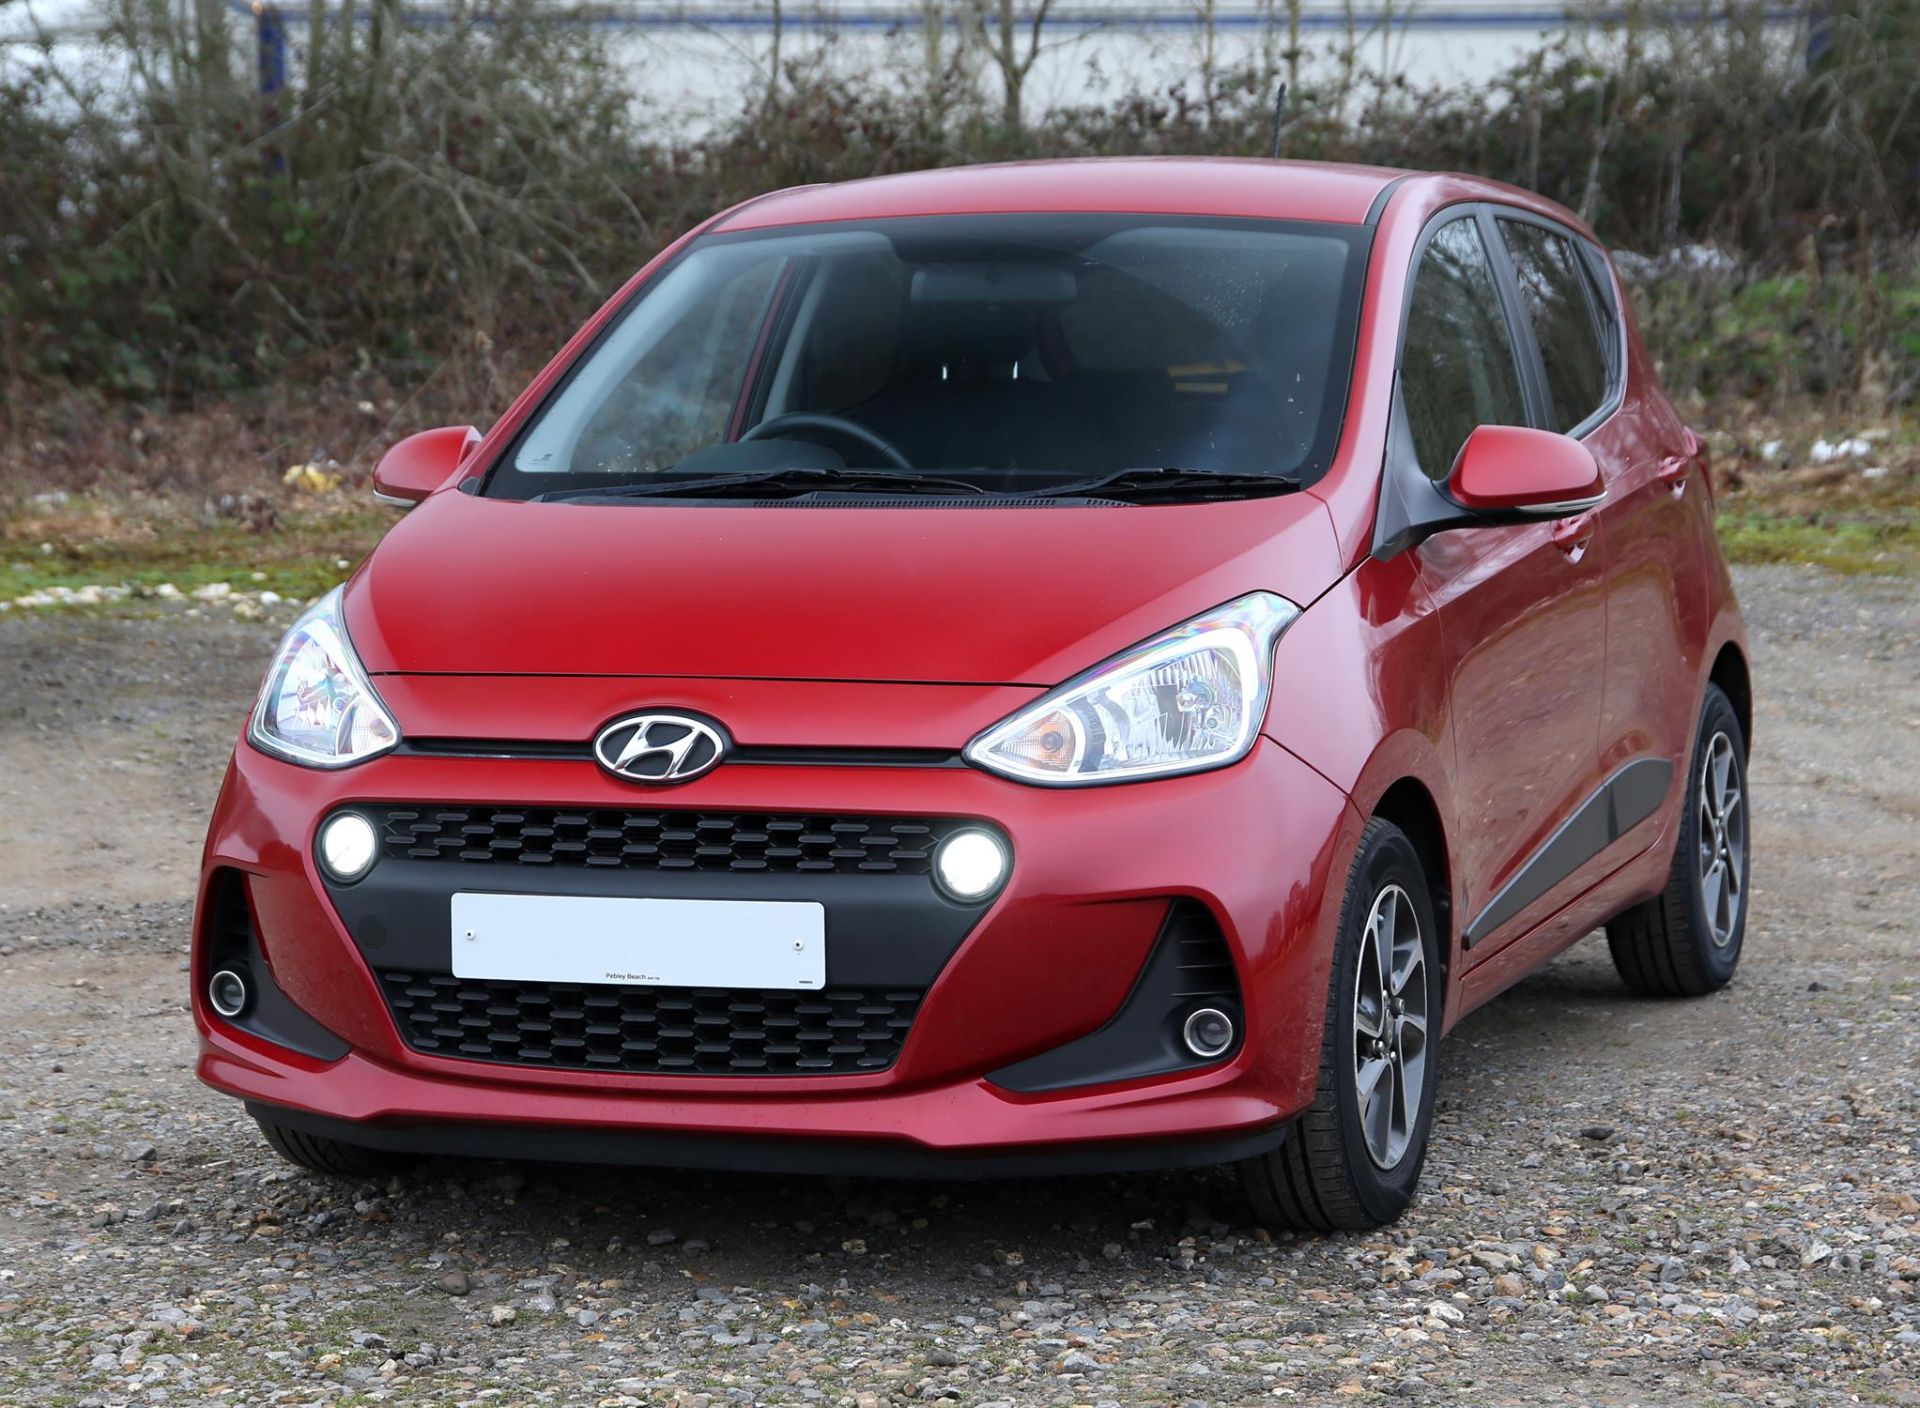 Hyundai I10 Blue Drive 1.2. Registration number FM68HZO - Full Service History with stamps -